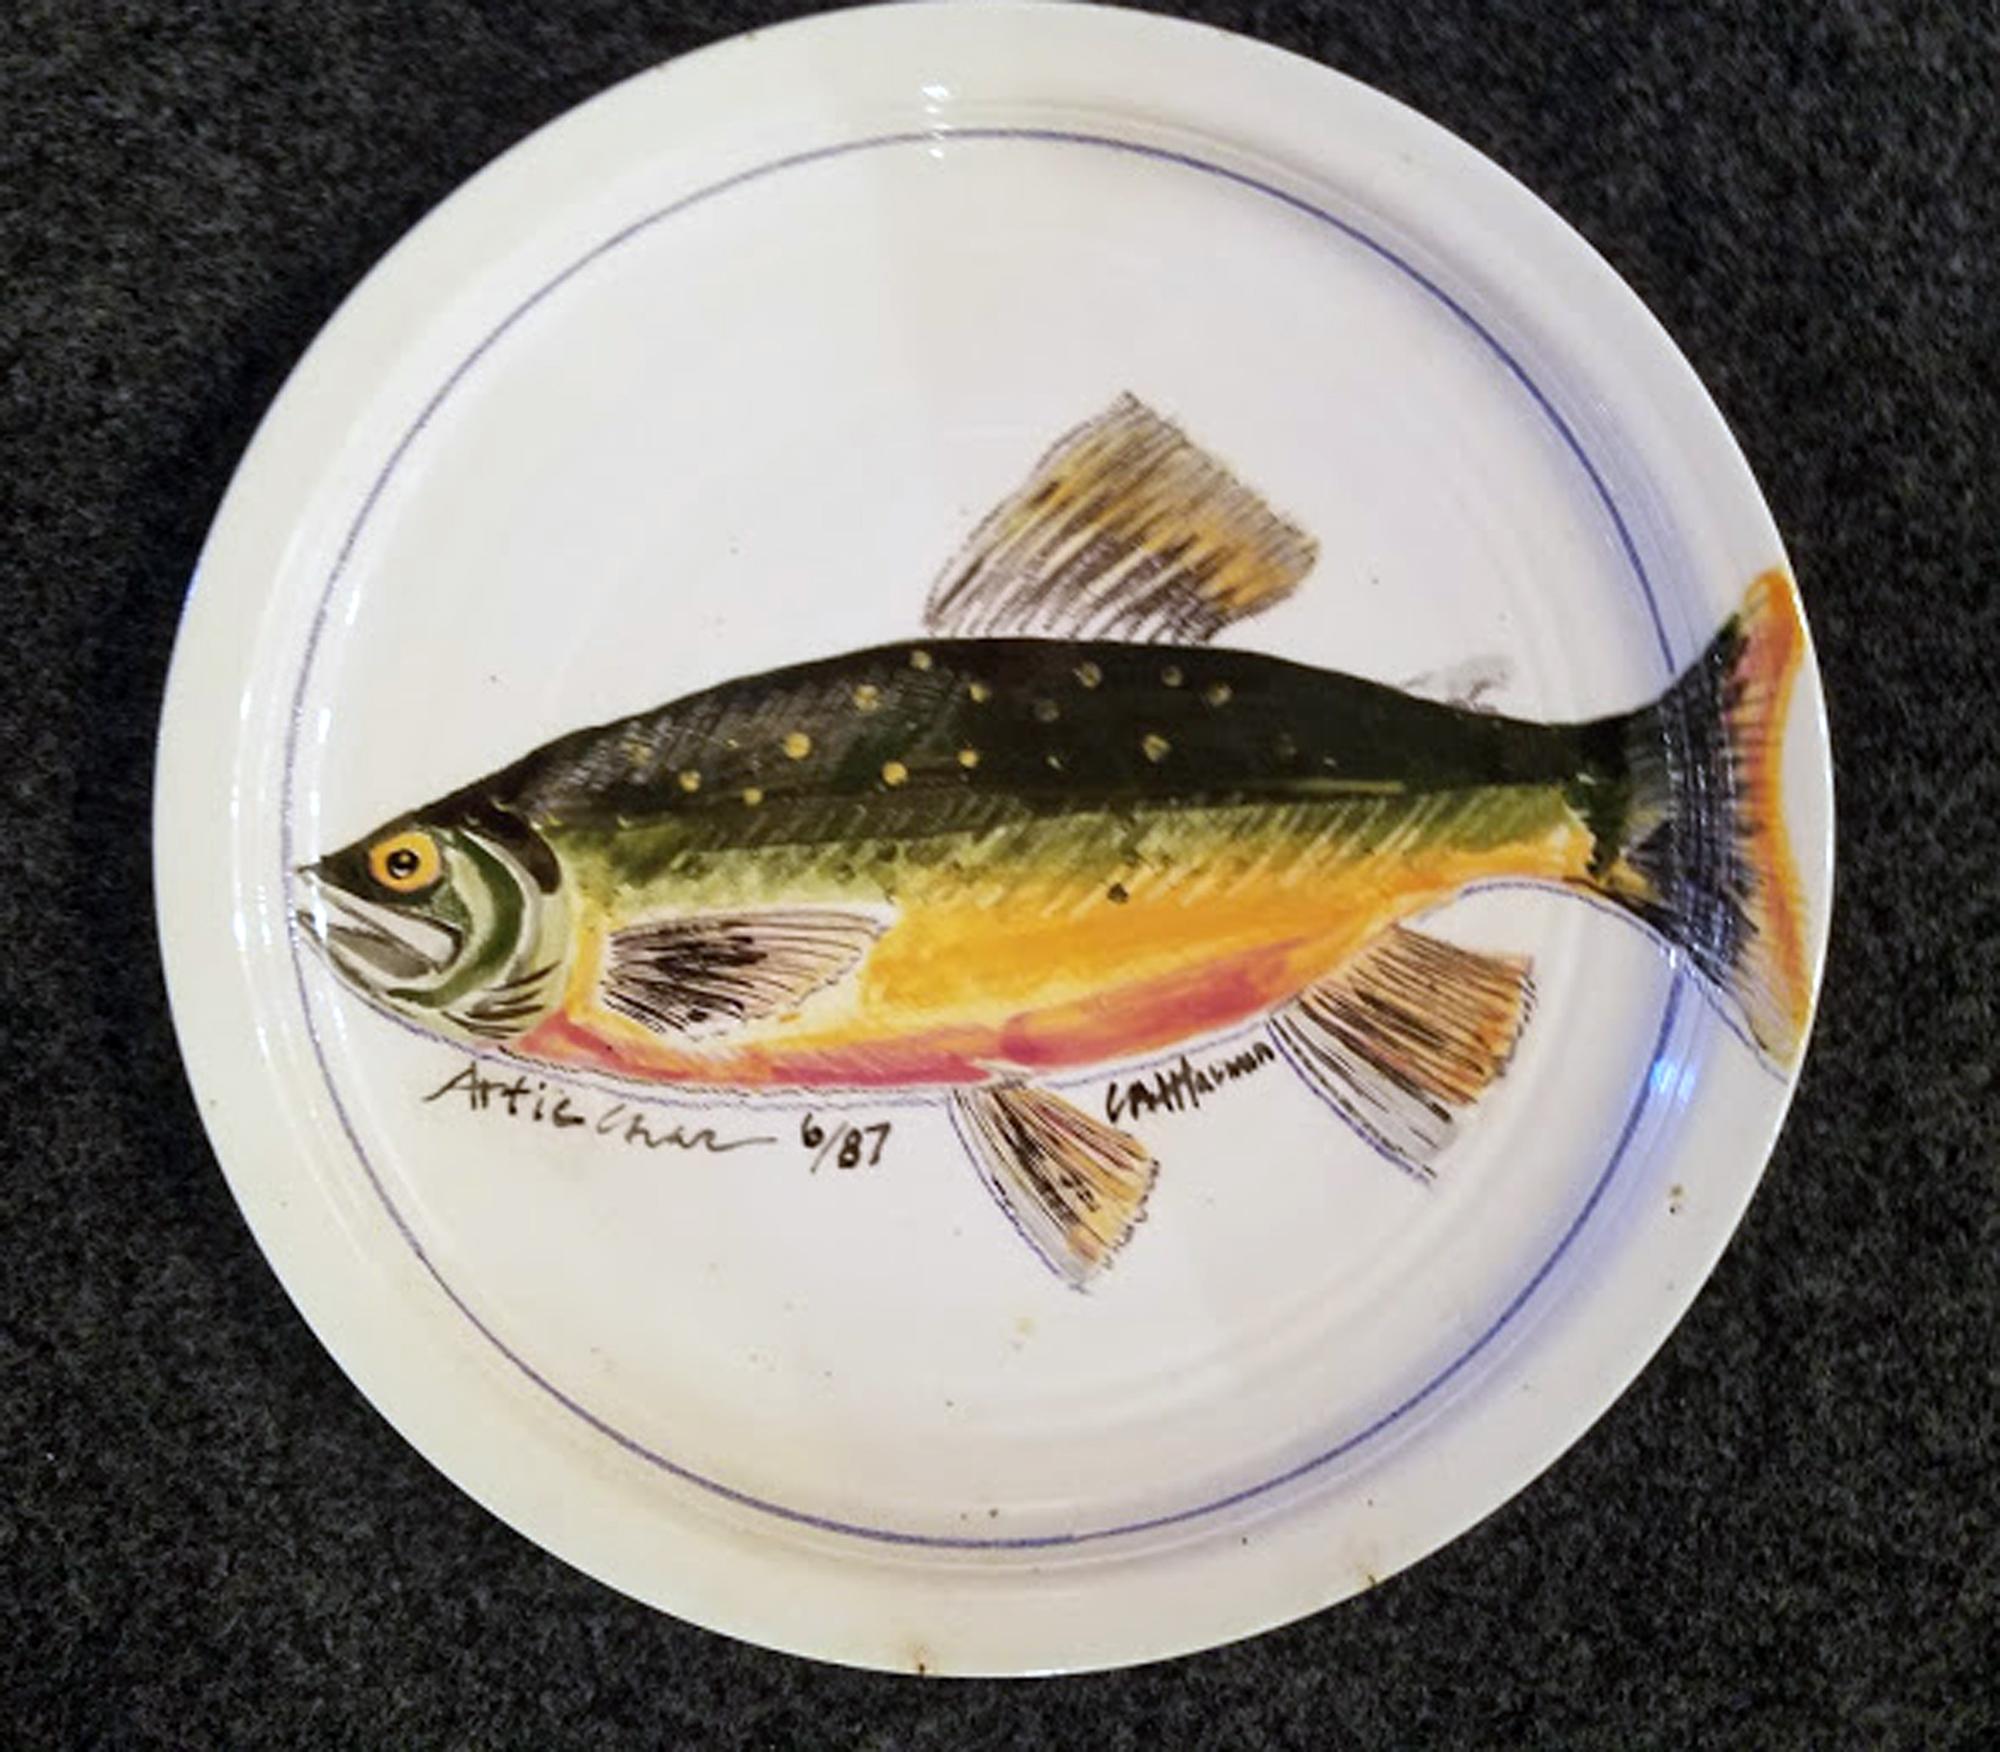 Organic Modern Carole Harman Ceramic Dishes Painted with Fish, Arctic Char & Ouananiche Salmon For Sale